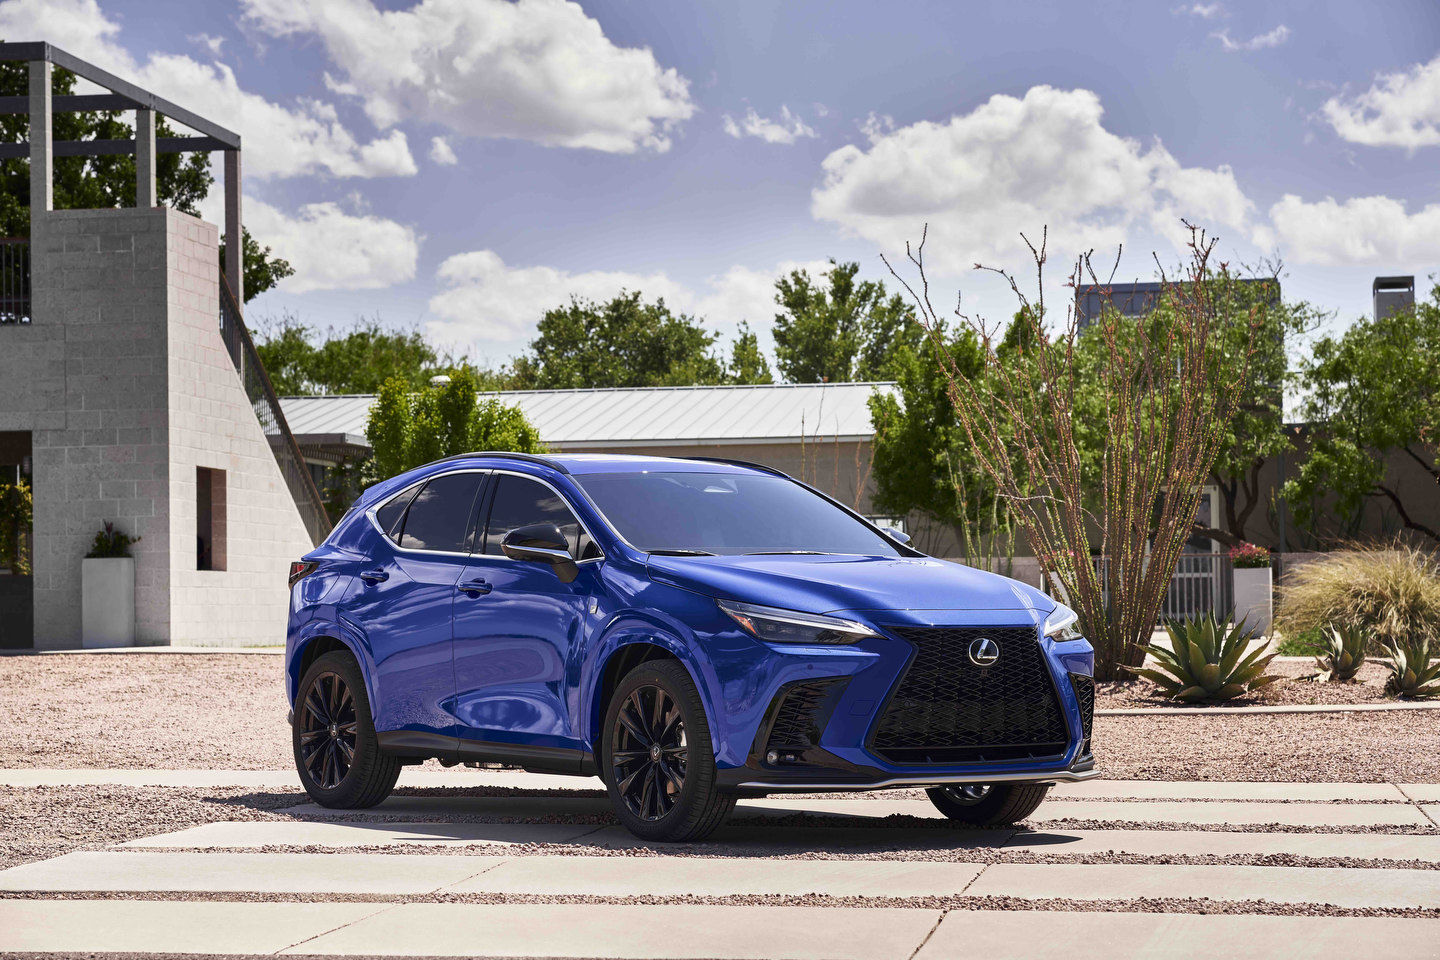 The new 2022 Lexus NX price and versions including the NX 450h+ plug-in hybrid